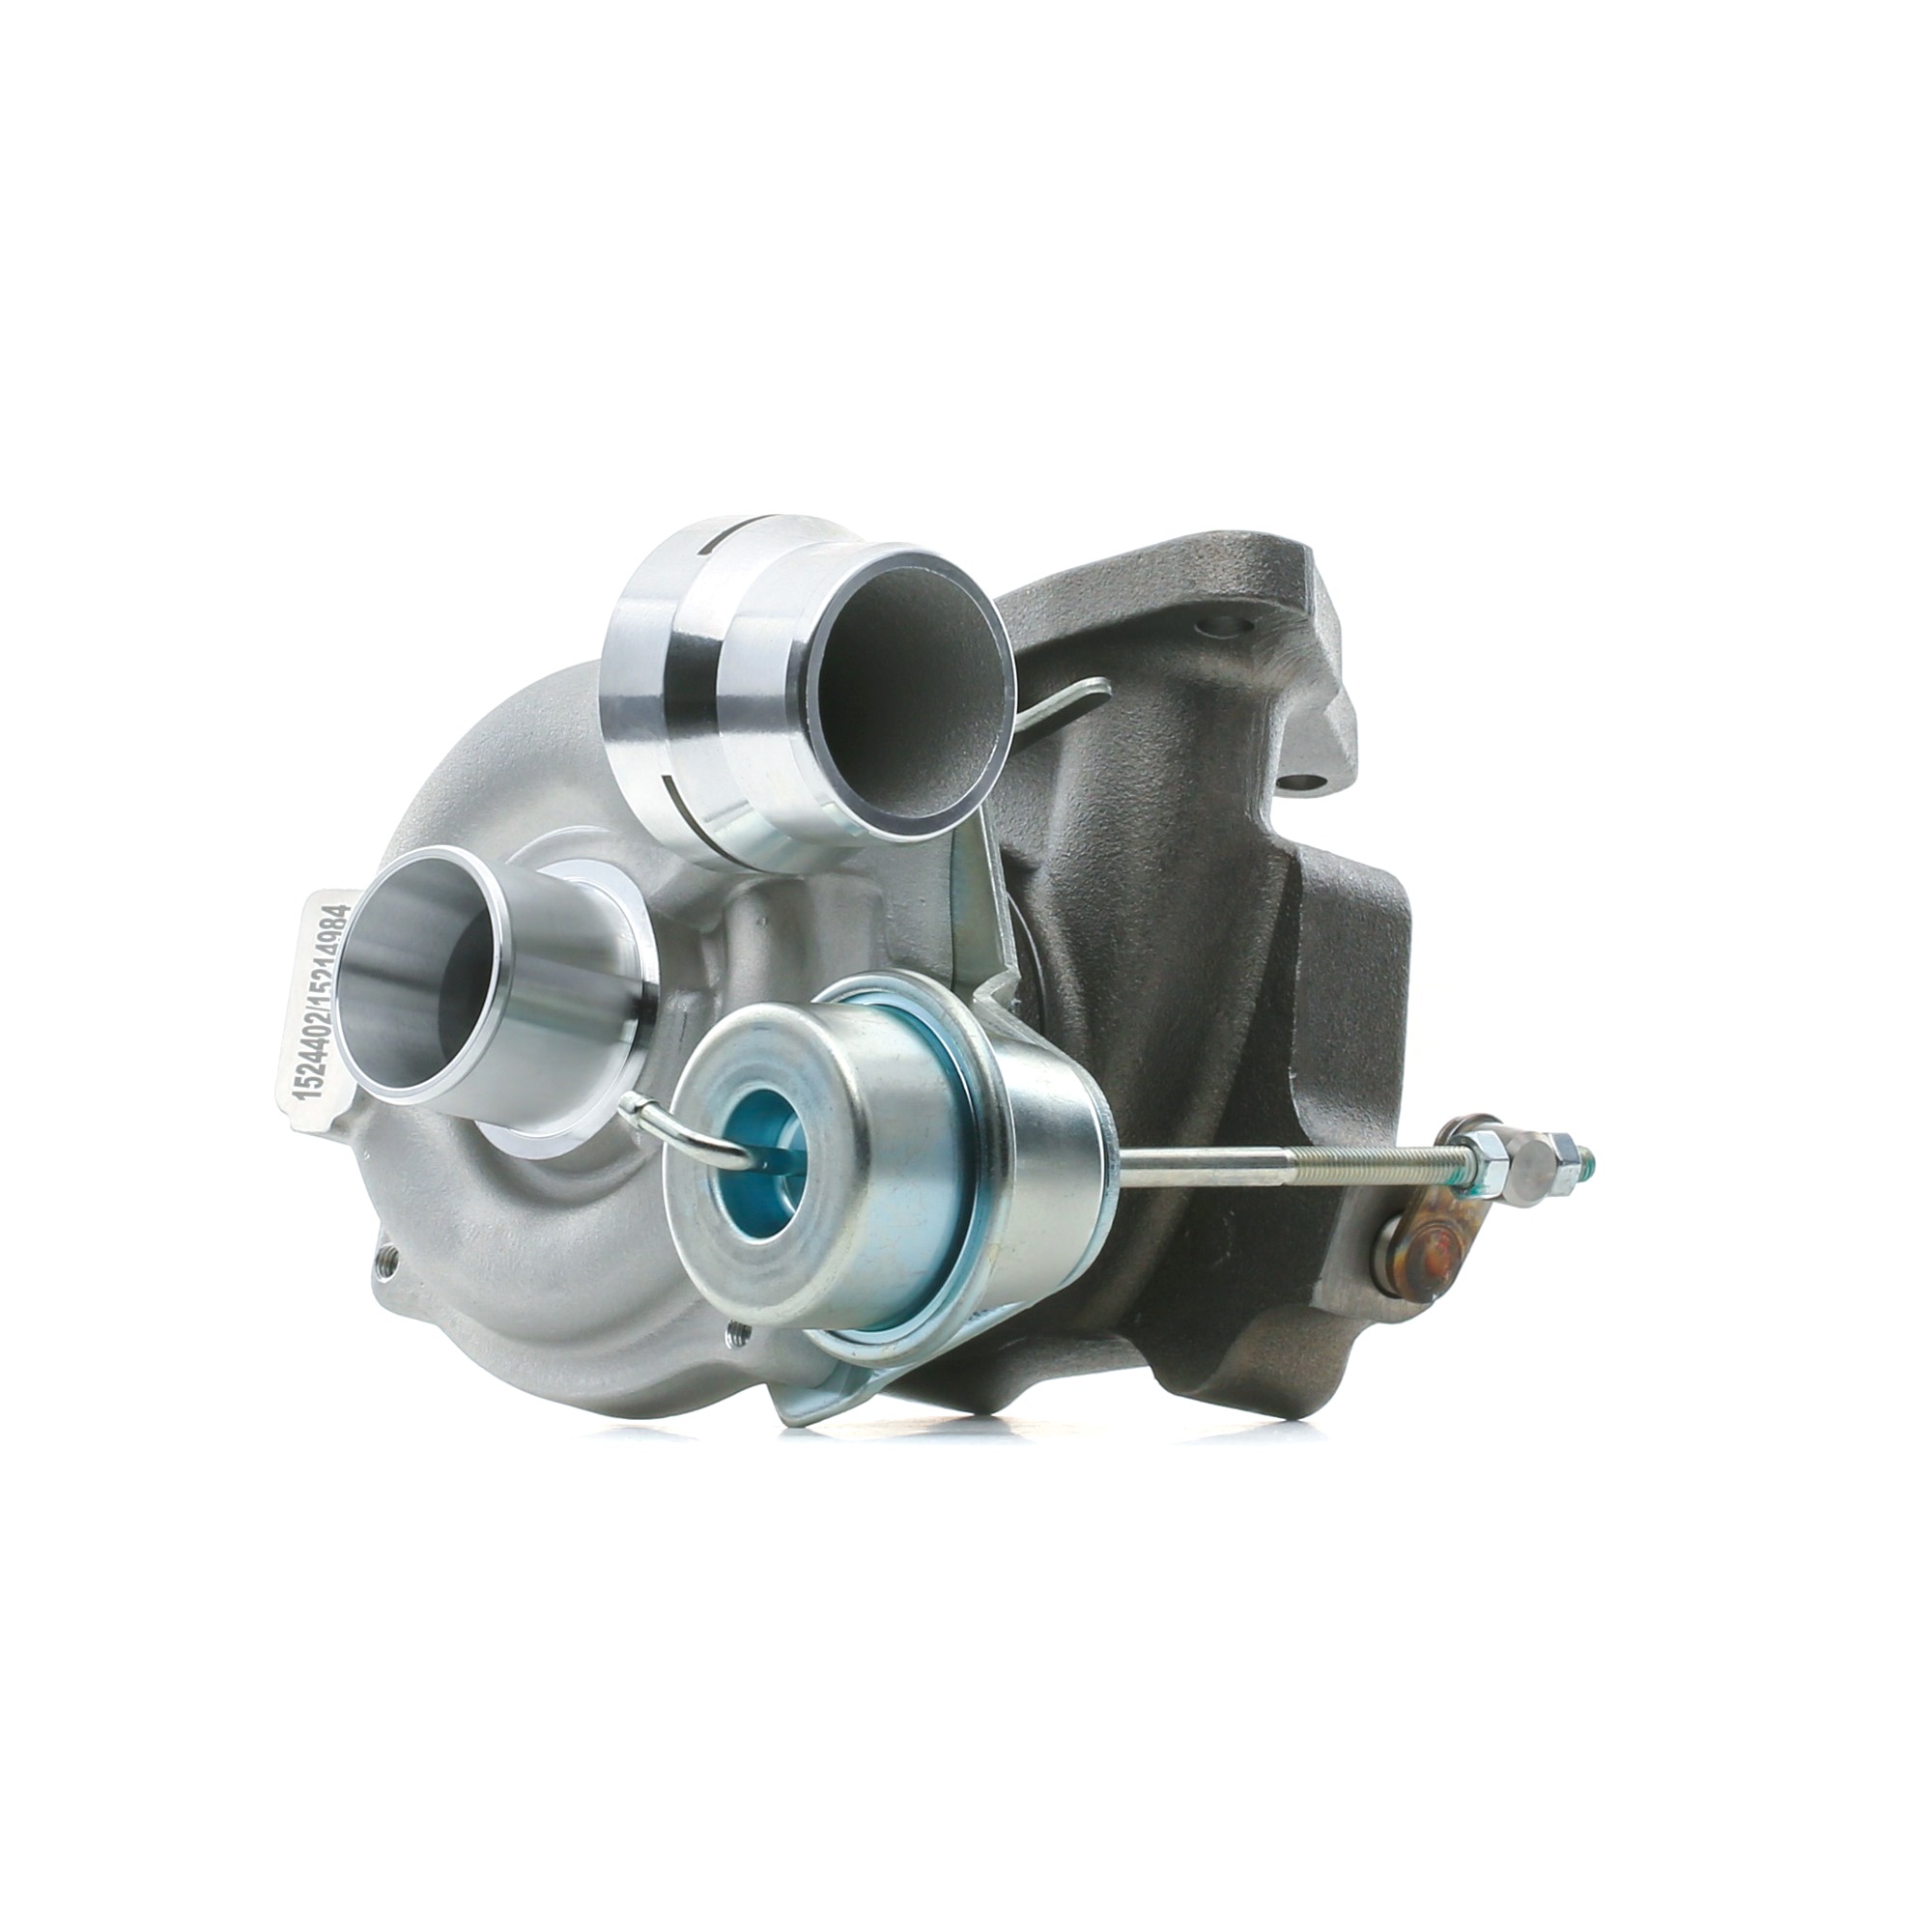 RIDEX 2234C0273 Turbocharger Exhaust Turbocharger, Pneumatic, with gaskets/seals